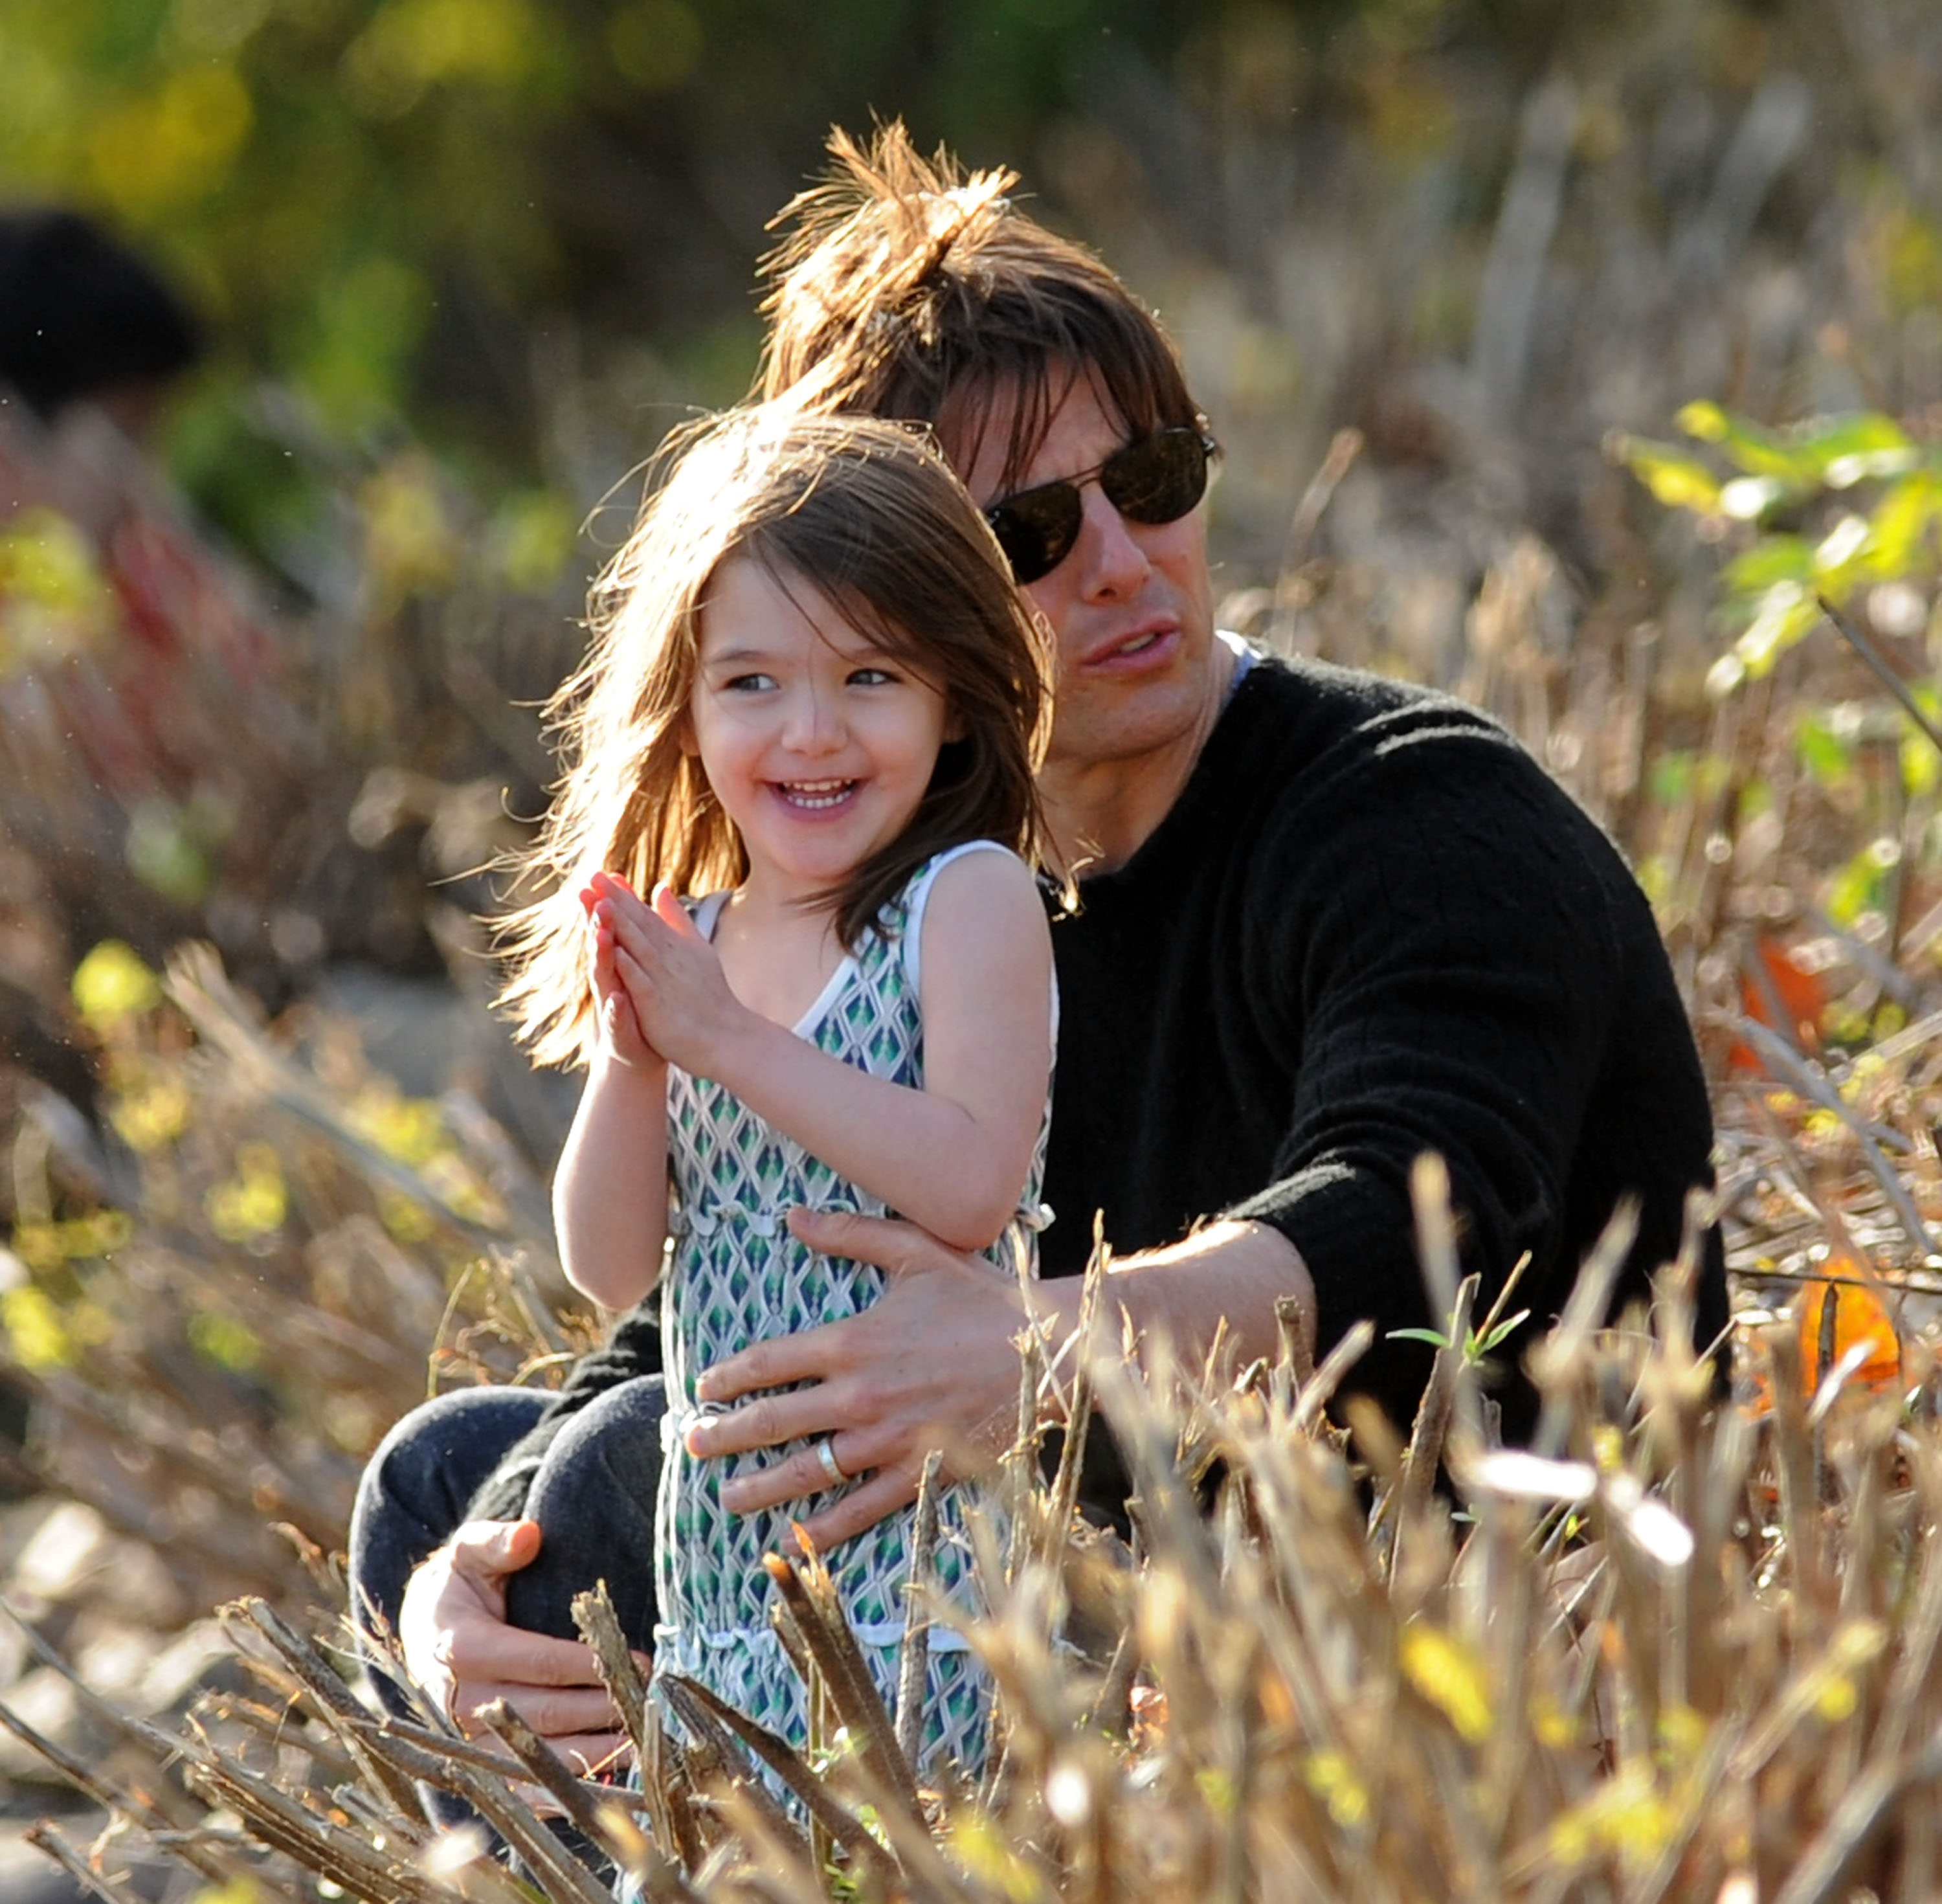 tom cruise ever see his daughter